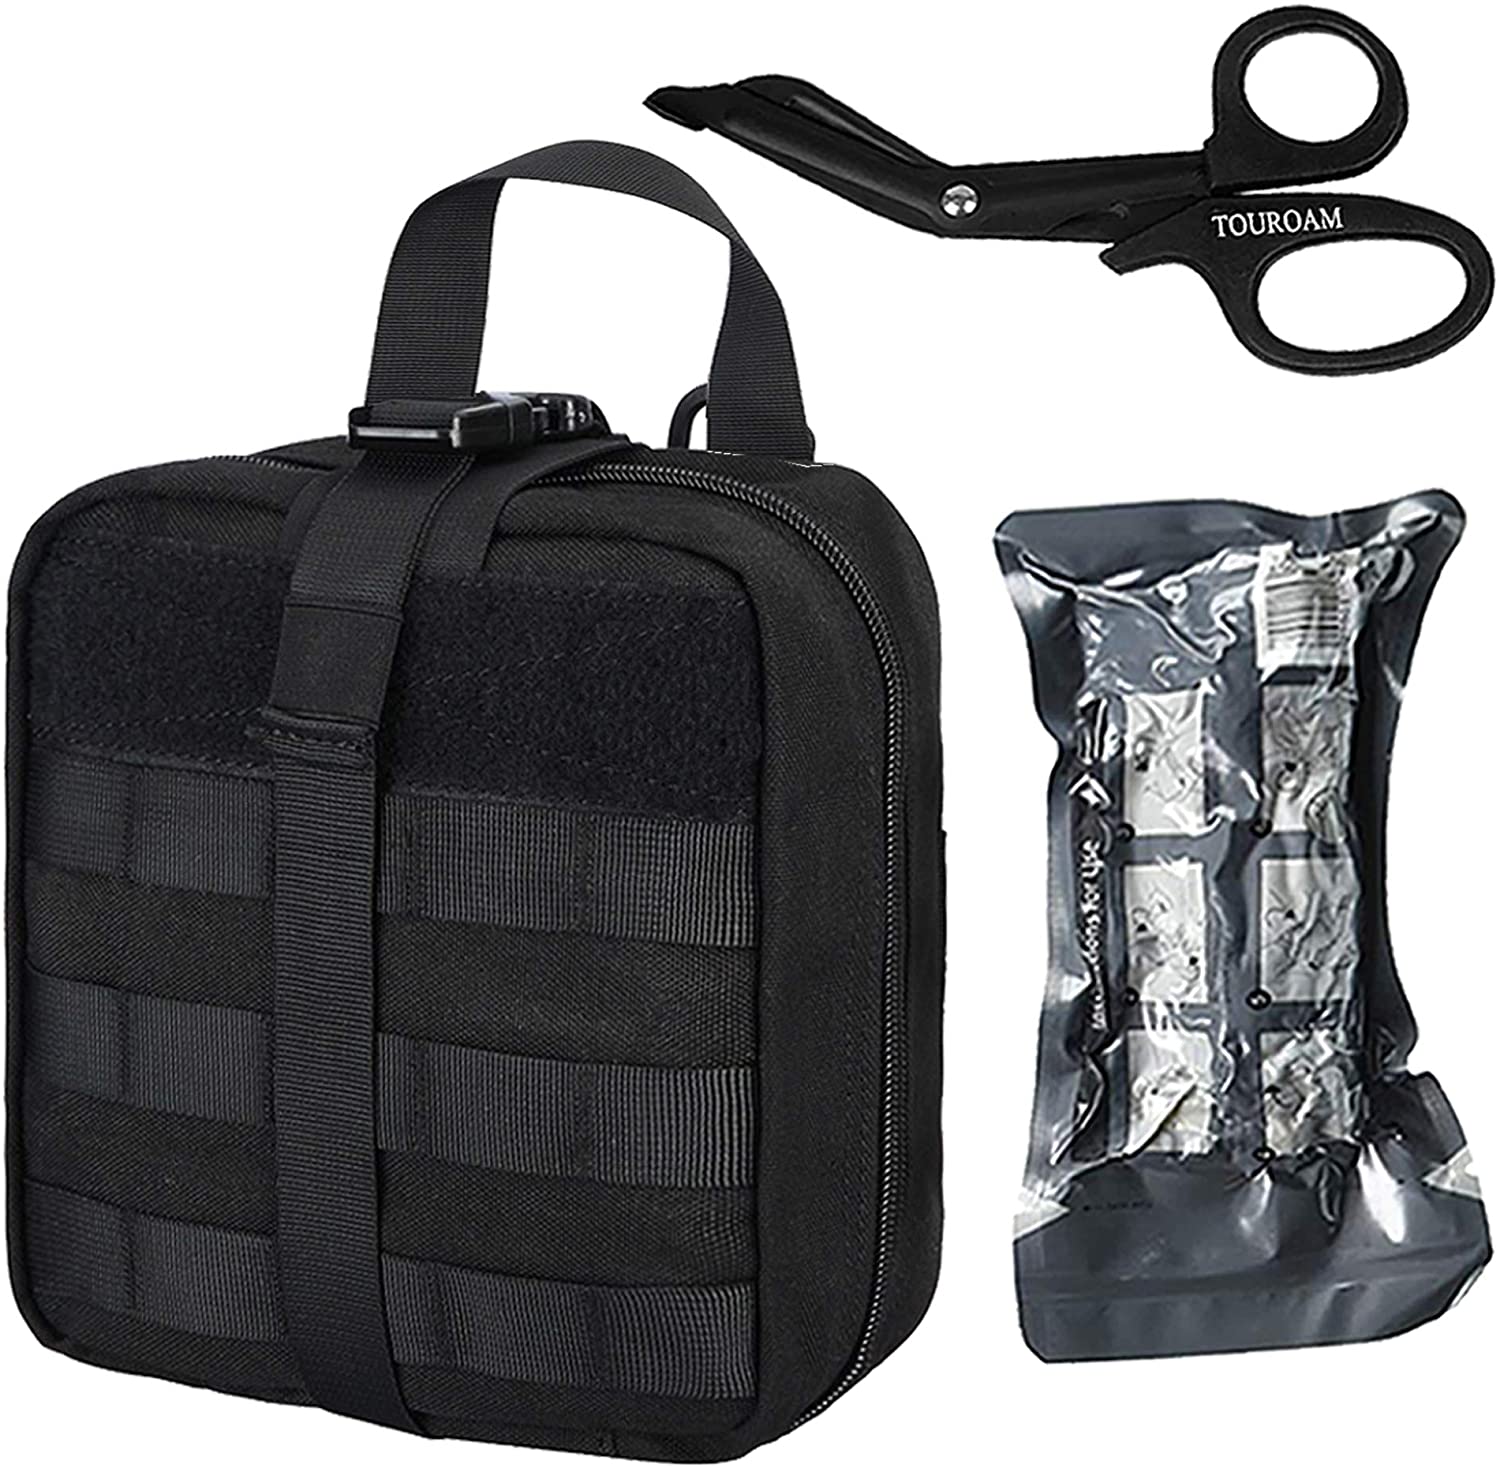 Tactical MOLLE Admin Pouch First Aid Kit-Emergency Survival Trauma